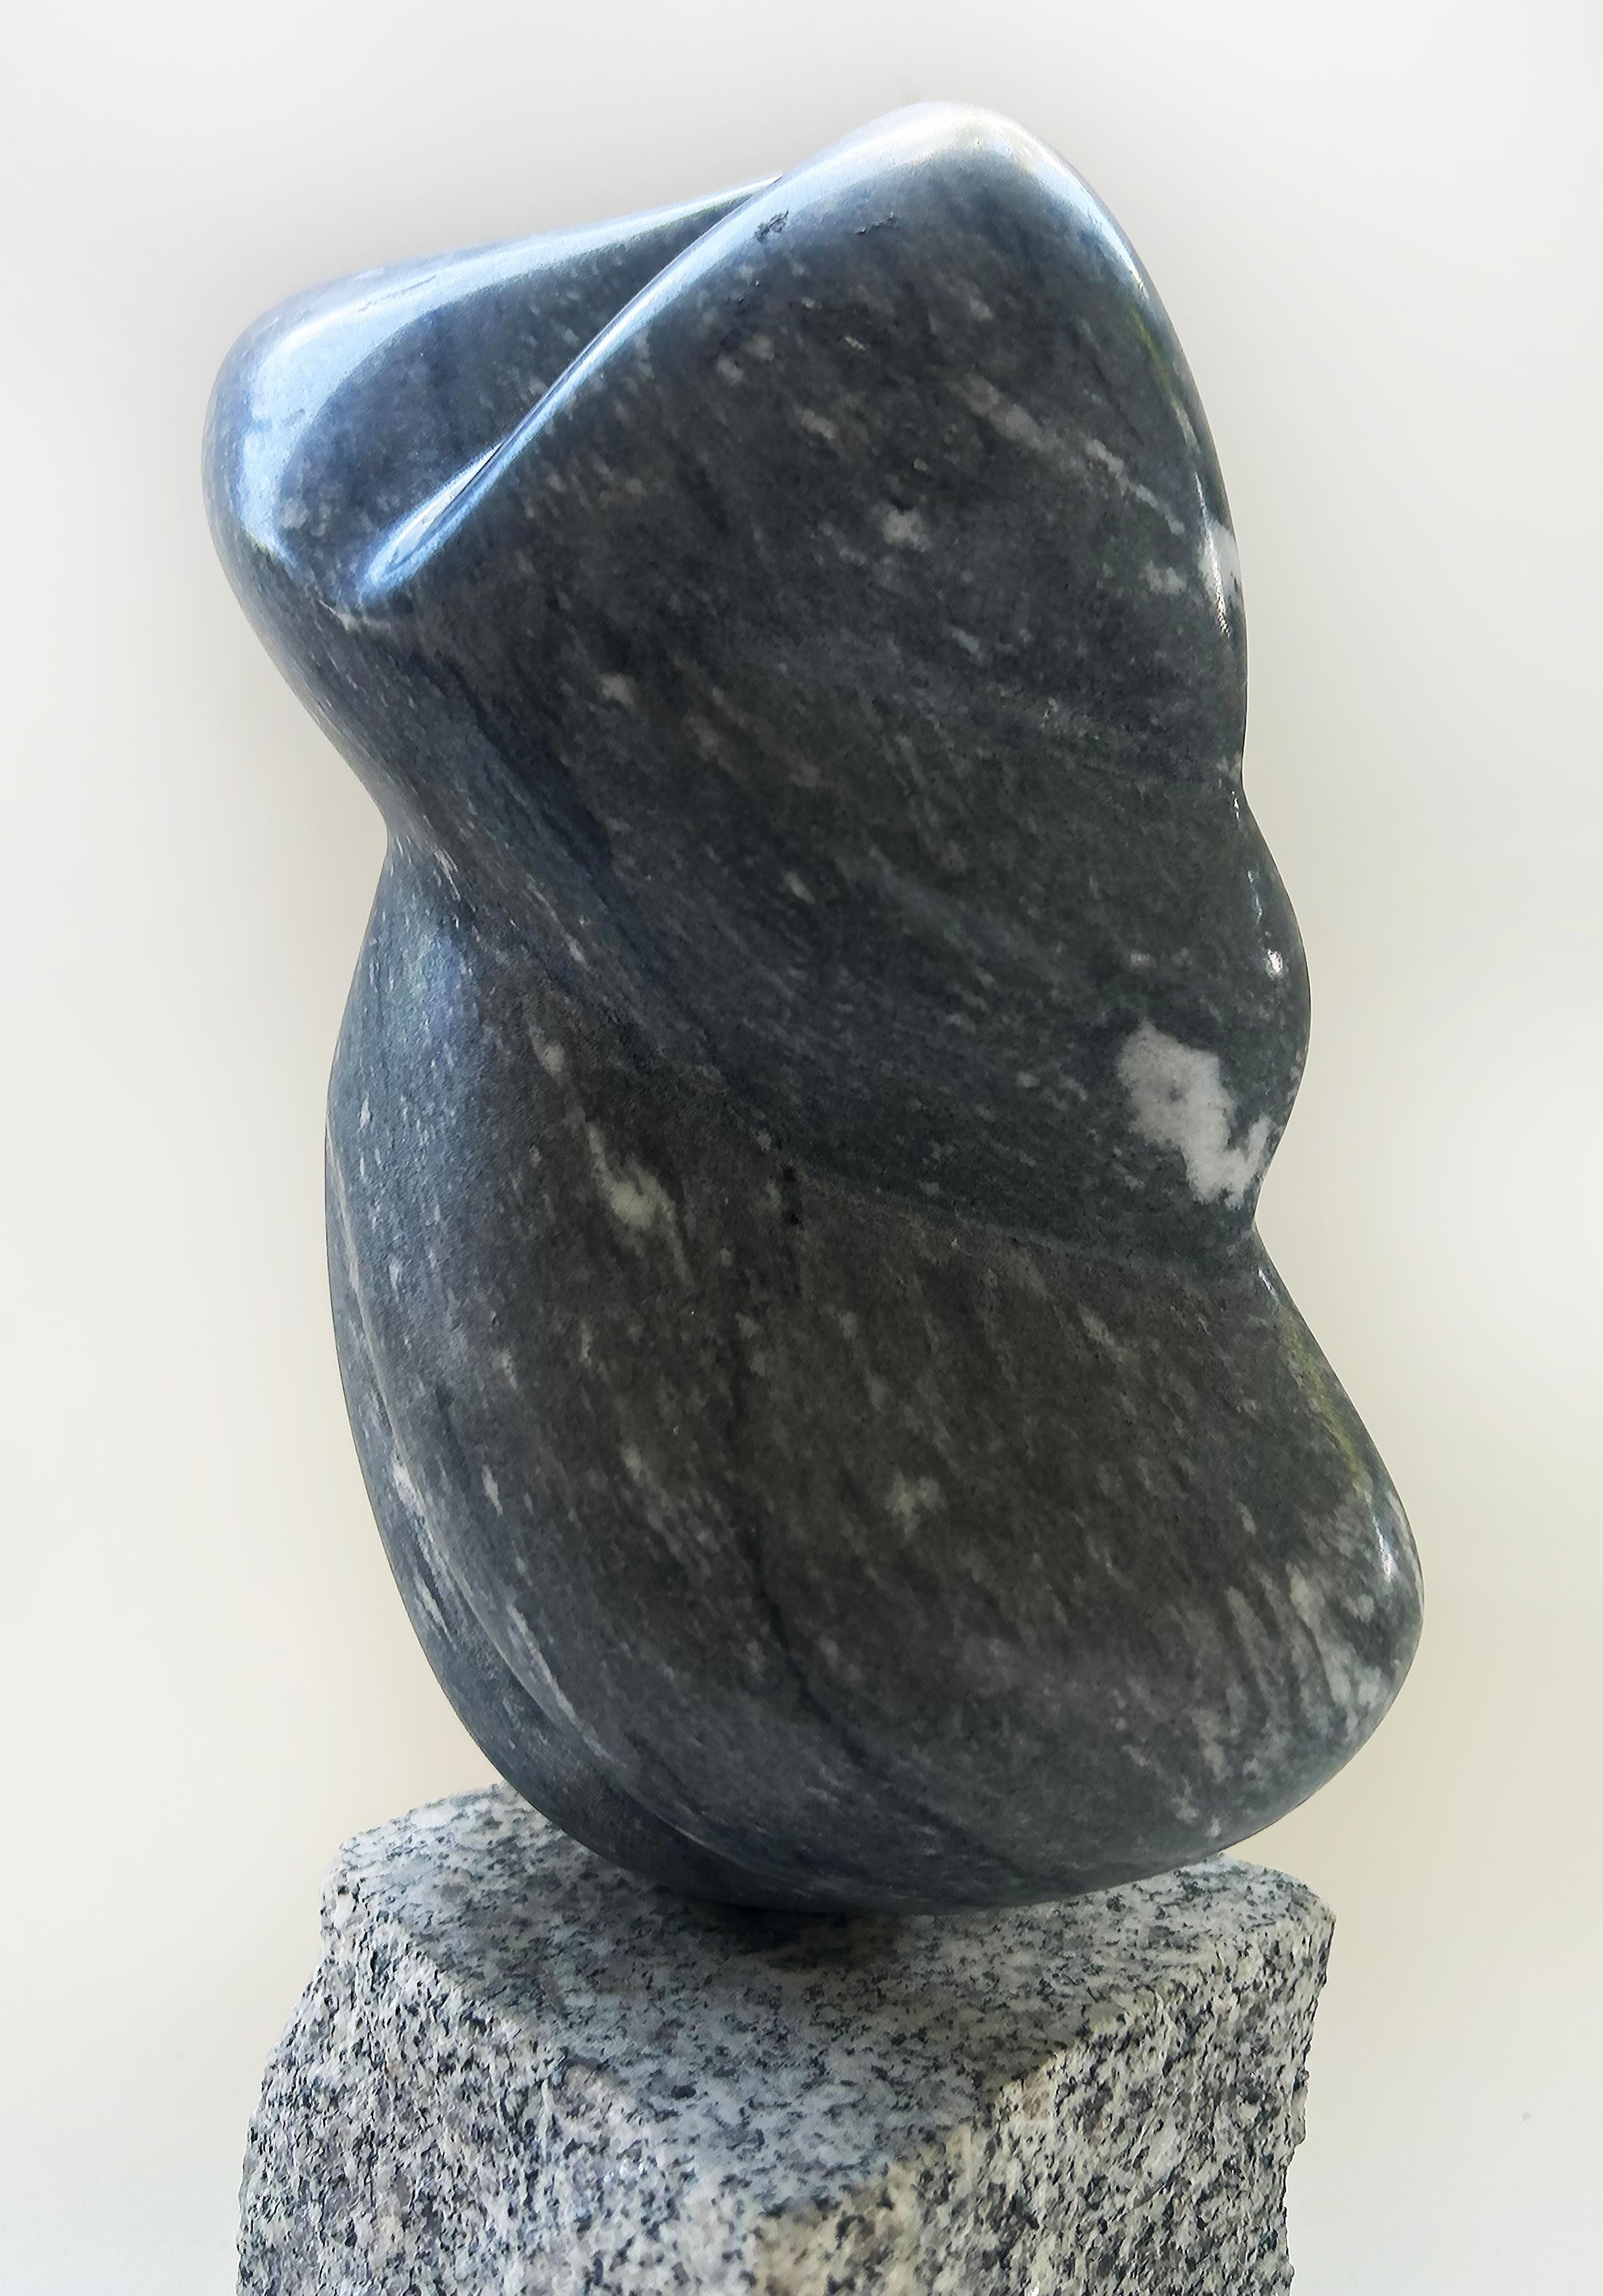 Abstract and Figurative Marble Hand-Carved Sculpture on a Granite Base

Offered for sale is an abstract and figurative hand-carved marble sculpture raised on a granite base.  The sculpture is illegible marked on the underside of the marble.  